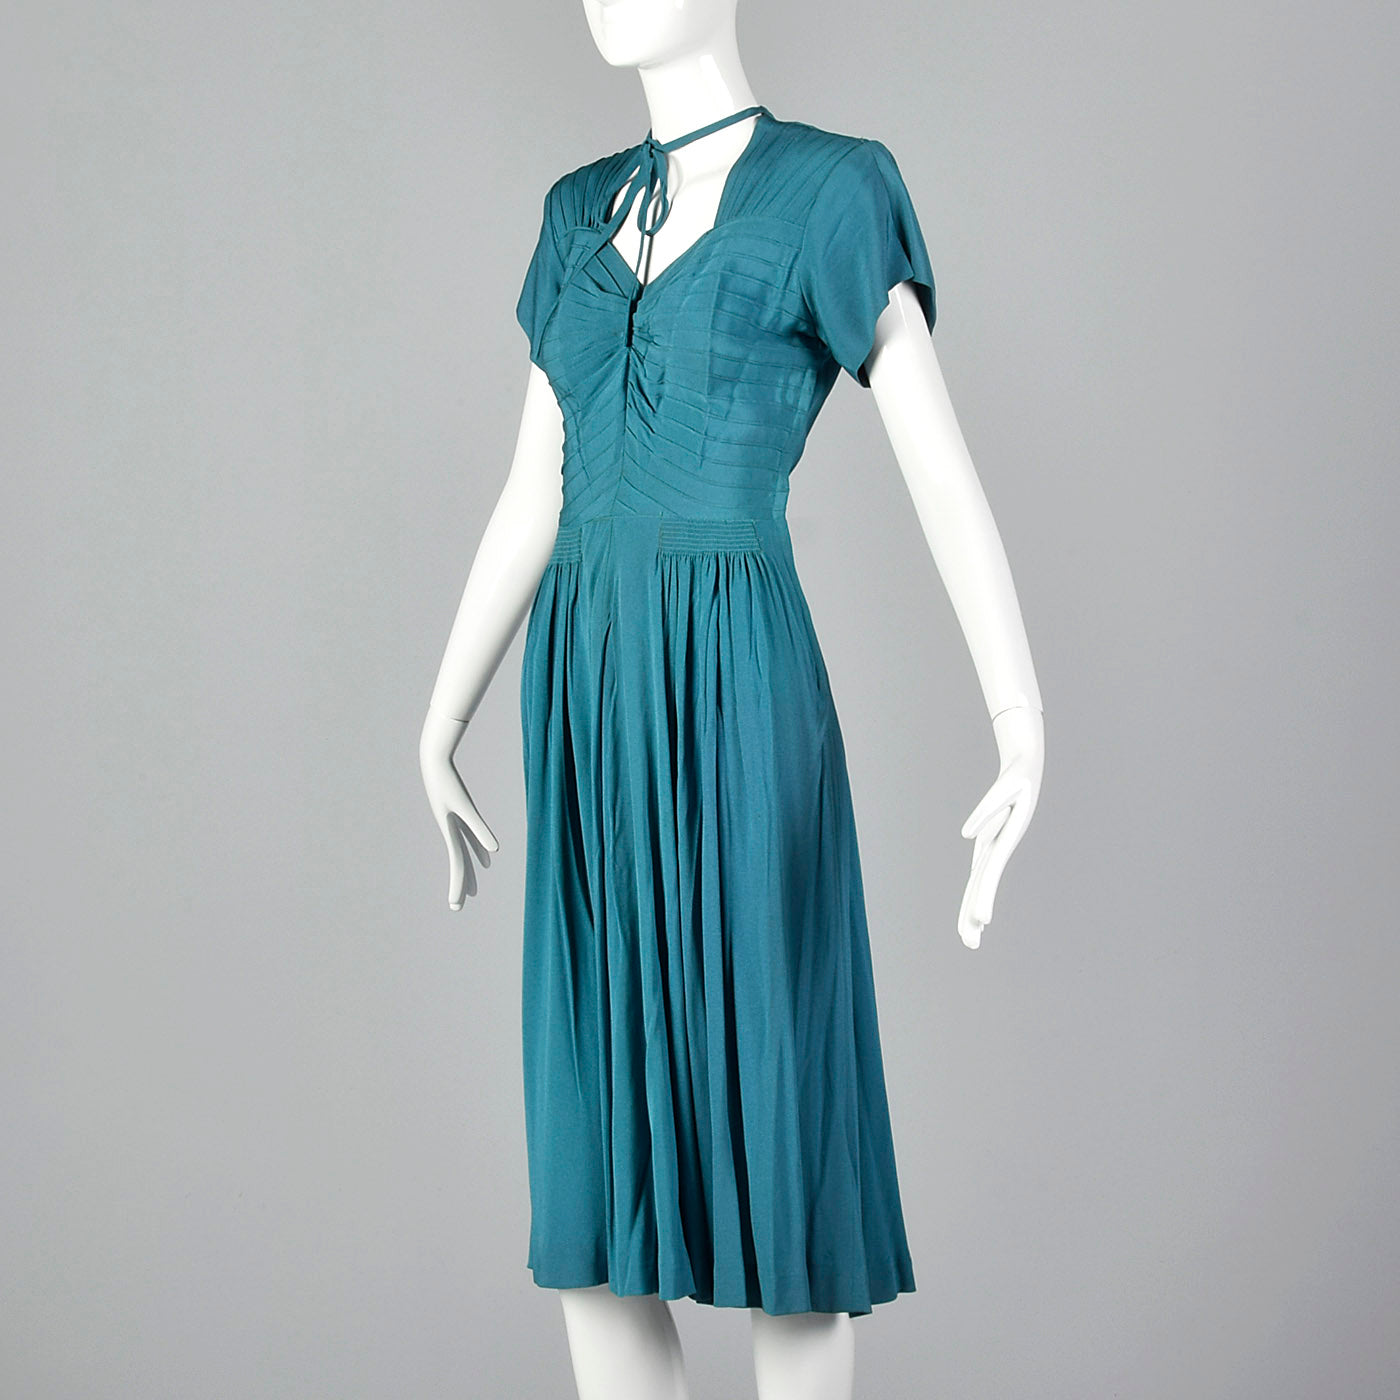 1940s Teal Rayon Dress with Neck Tie